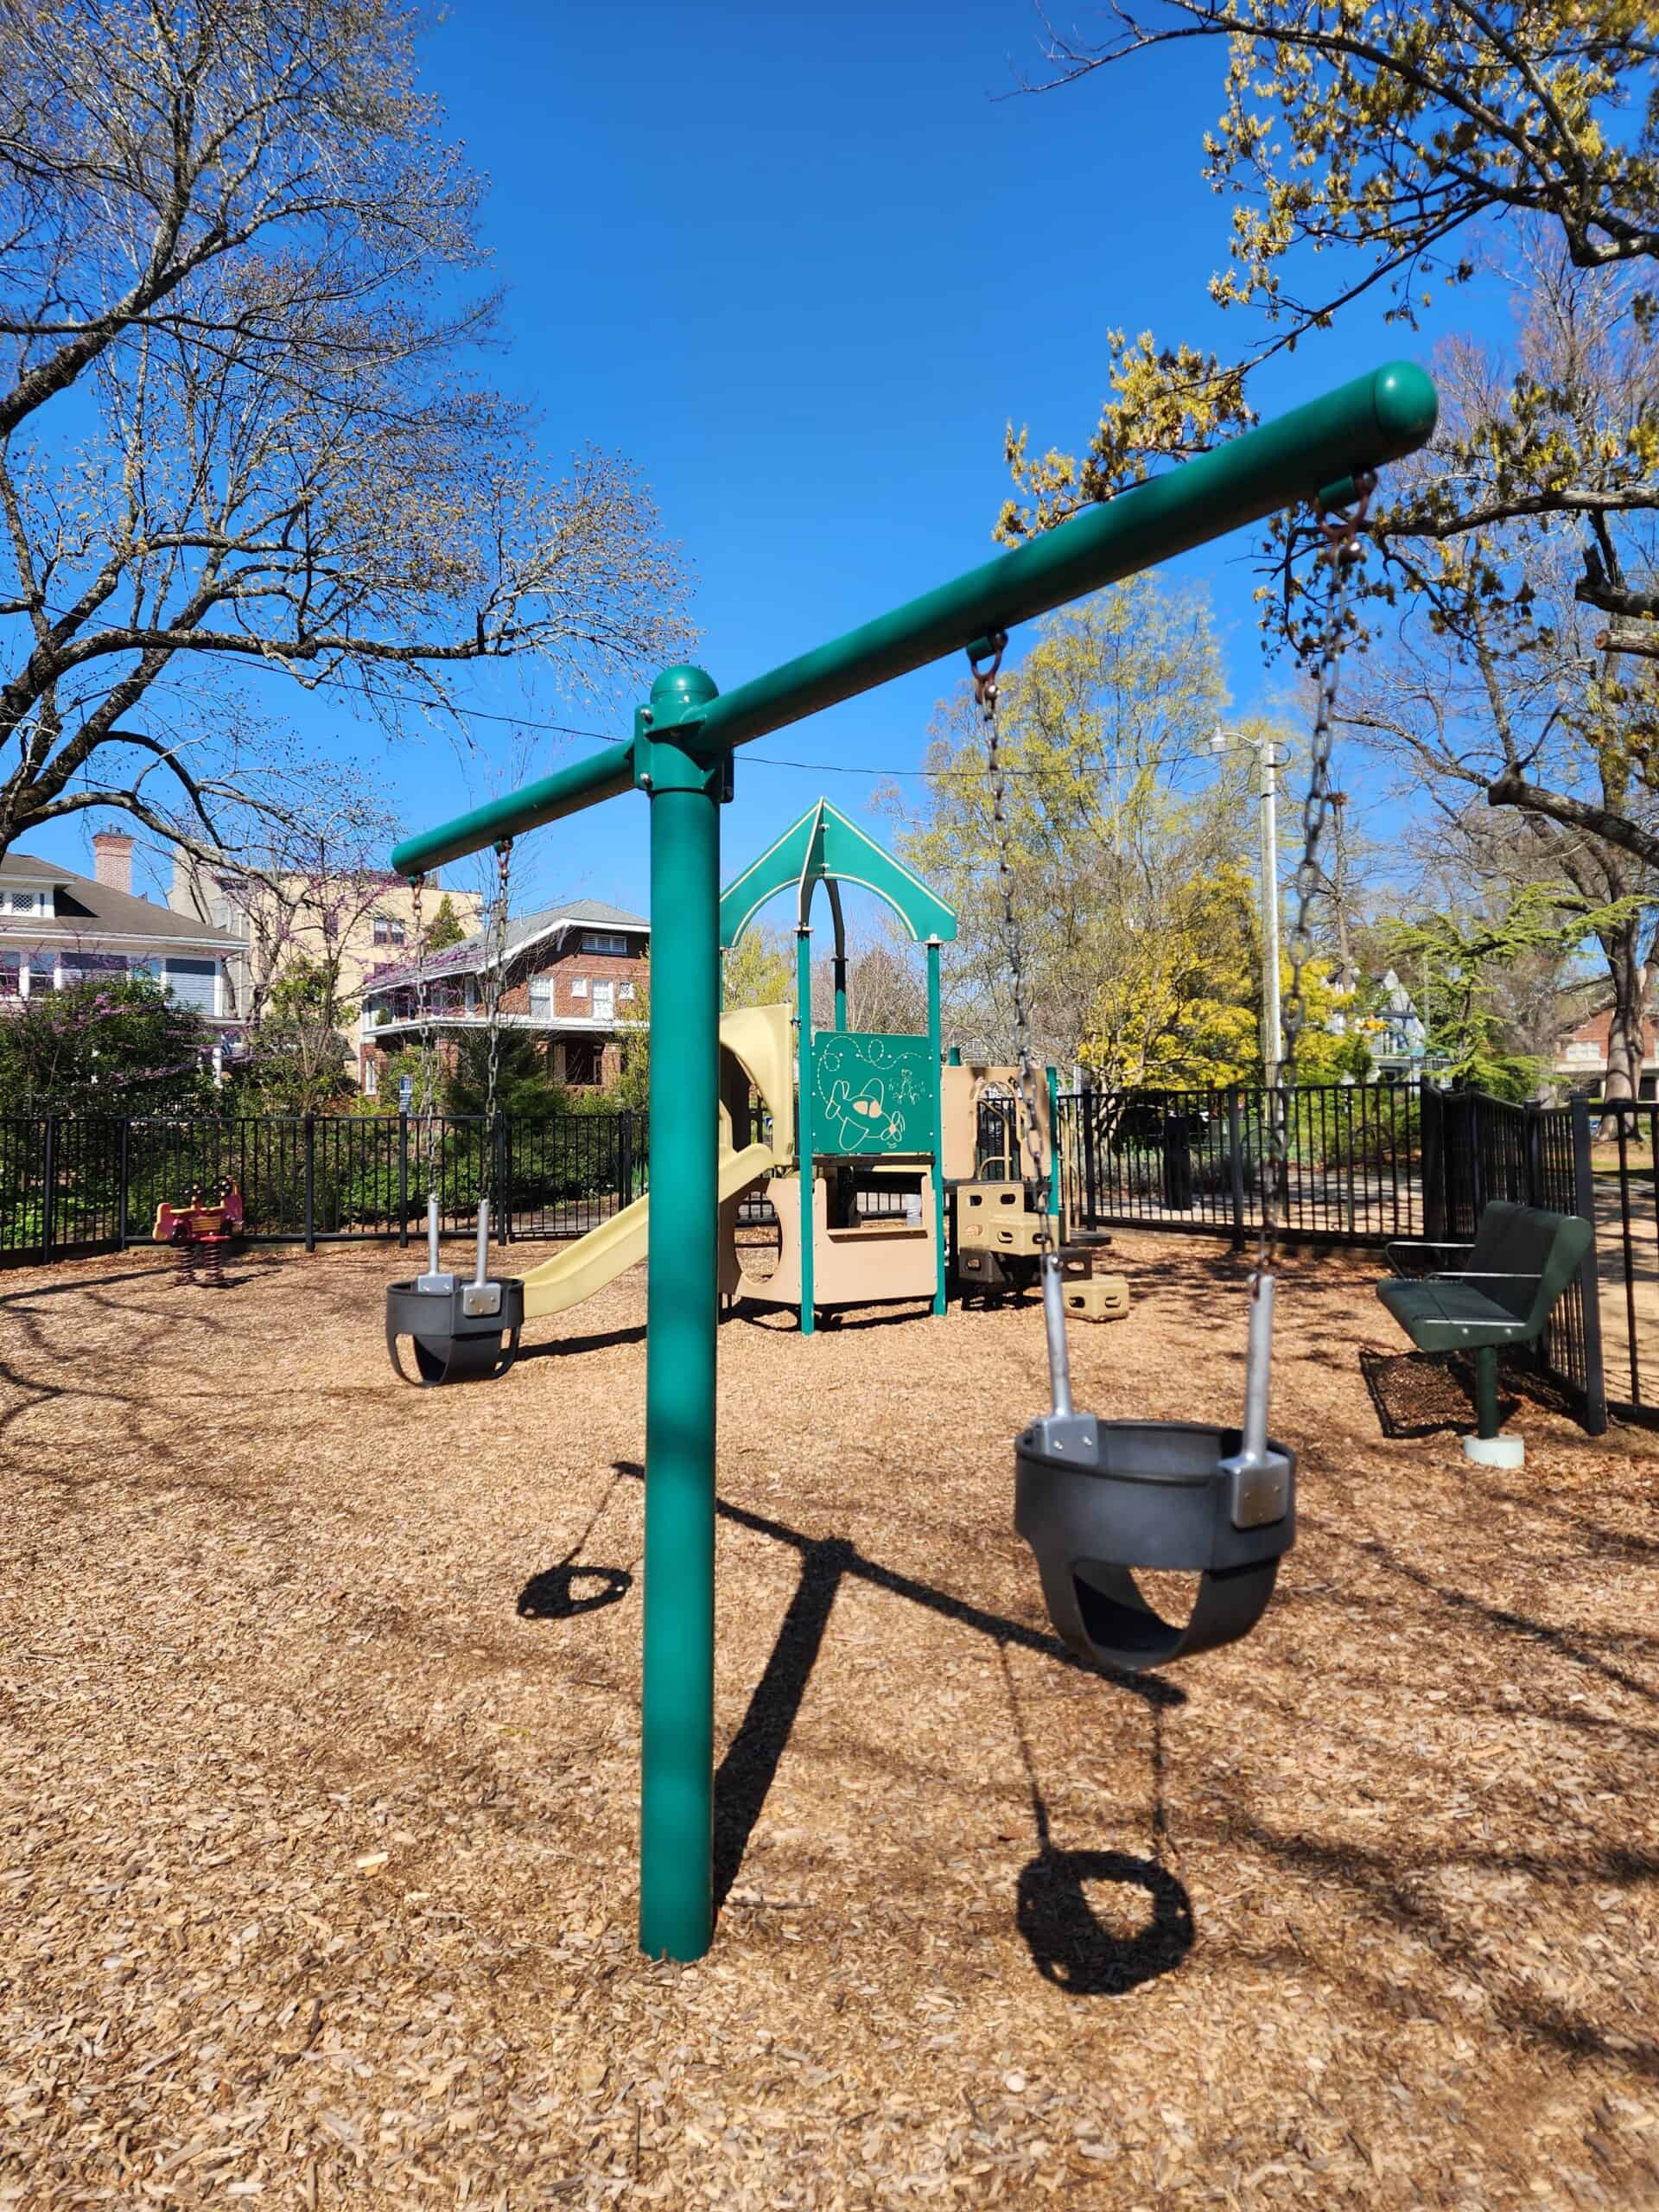 Foreground shows a close-up of a swing set with black rubber swings hanging from a green metal frame, with a playground structure in the background featuring slides and interactive elements, all against the backdrop of a clear blue sky and leafless trees